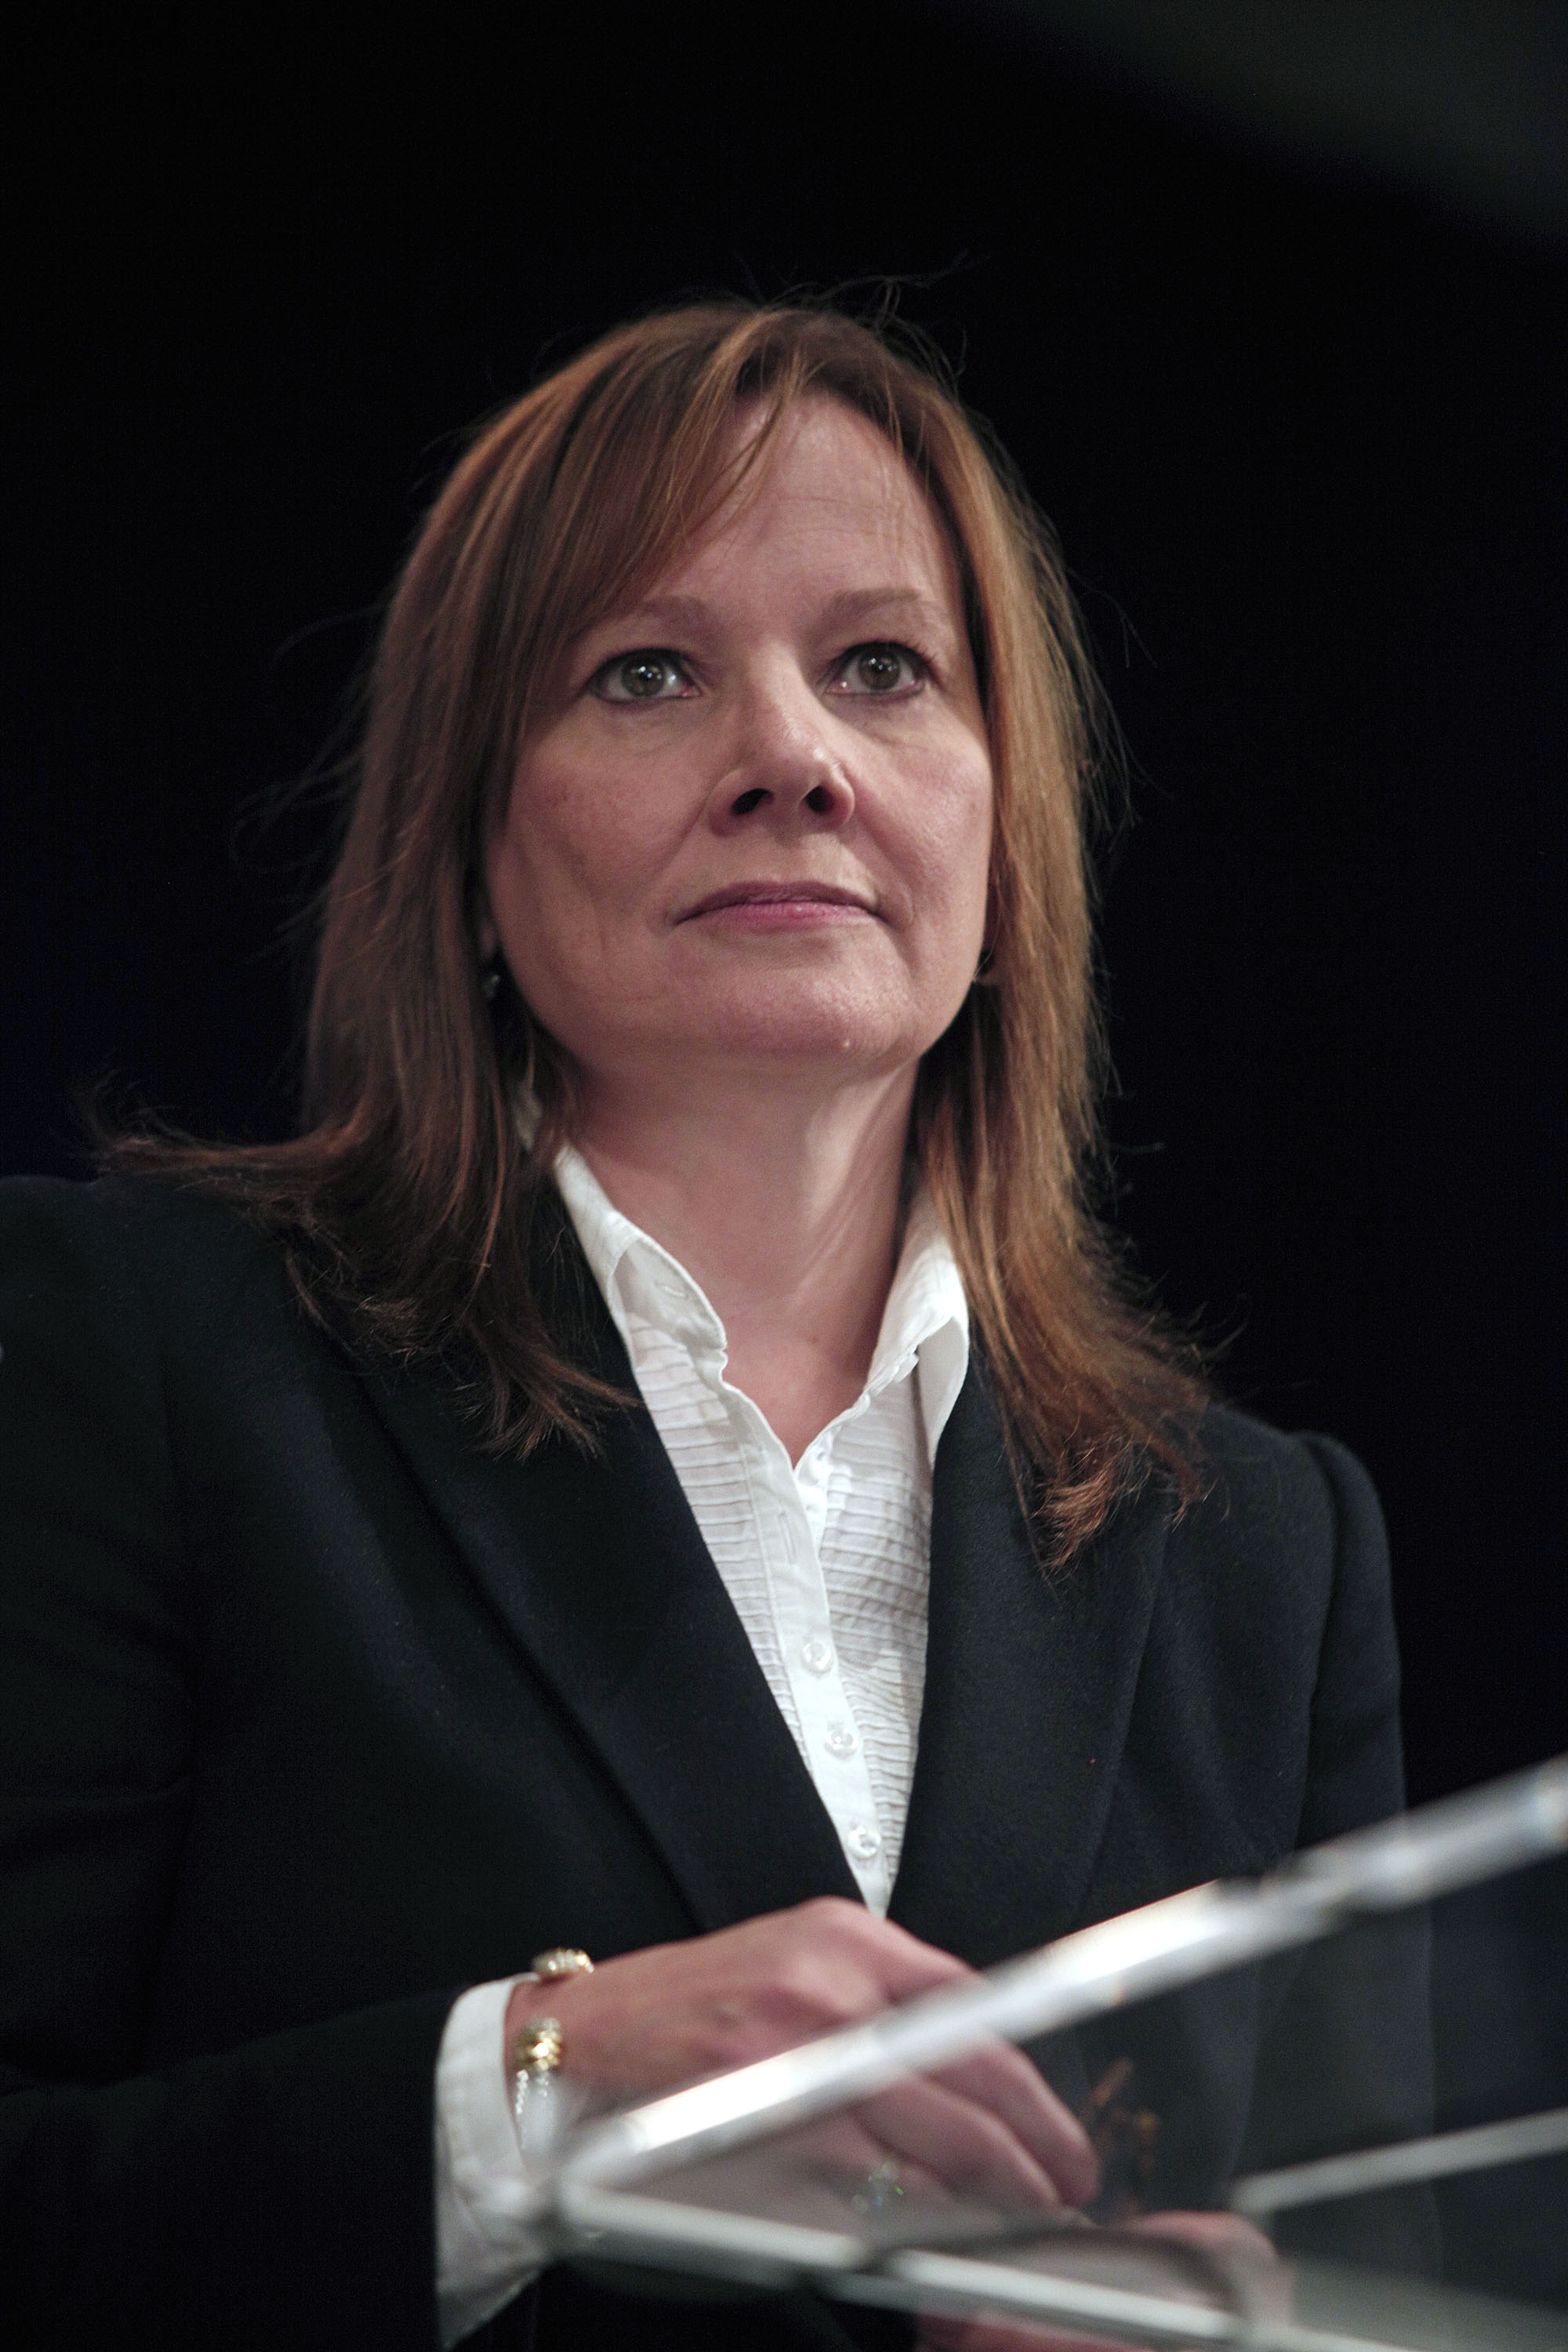 General Motors Chief Executive Officer Mary Barra address the Detroit Economic Club October 28, 2014 in Detroit, Michigan. Barra announced that GM will be investing $540 million in its plants in Michigan. $240 million of that will be invested in the company's Warren Transmission Plant, allowing them to produce the transmissions for the next-generation Chevrolet Volt in Michigan, as opposed to in Mexico. (Bill Pugliano—Getty Images)